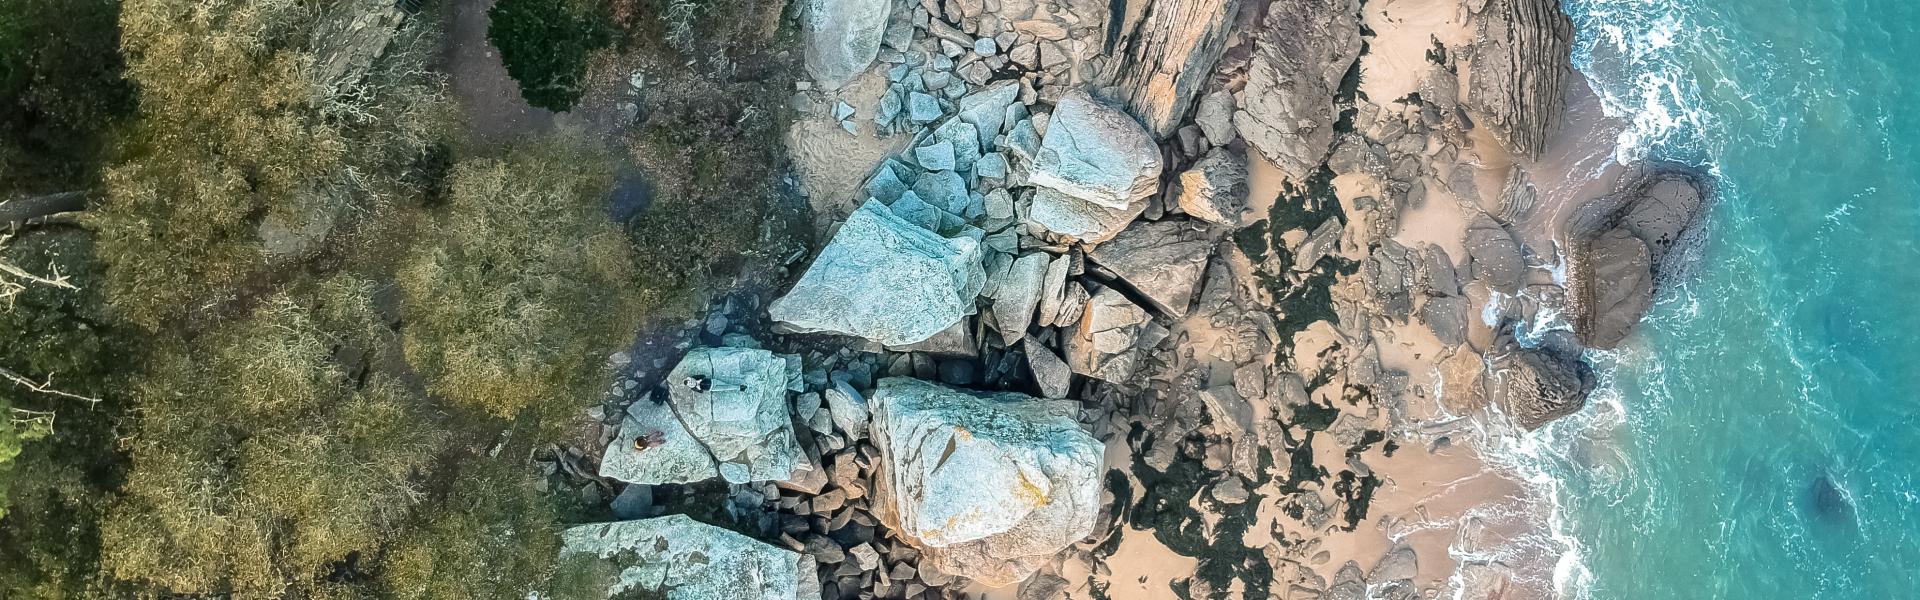 aerial view photography of rocks near body of water during daytime